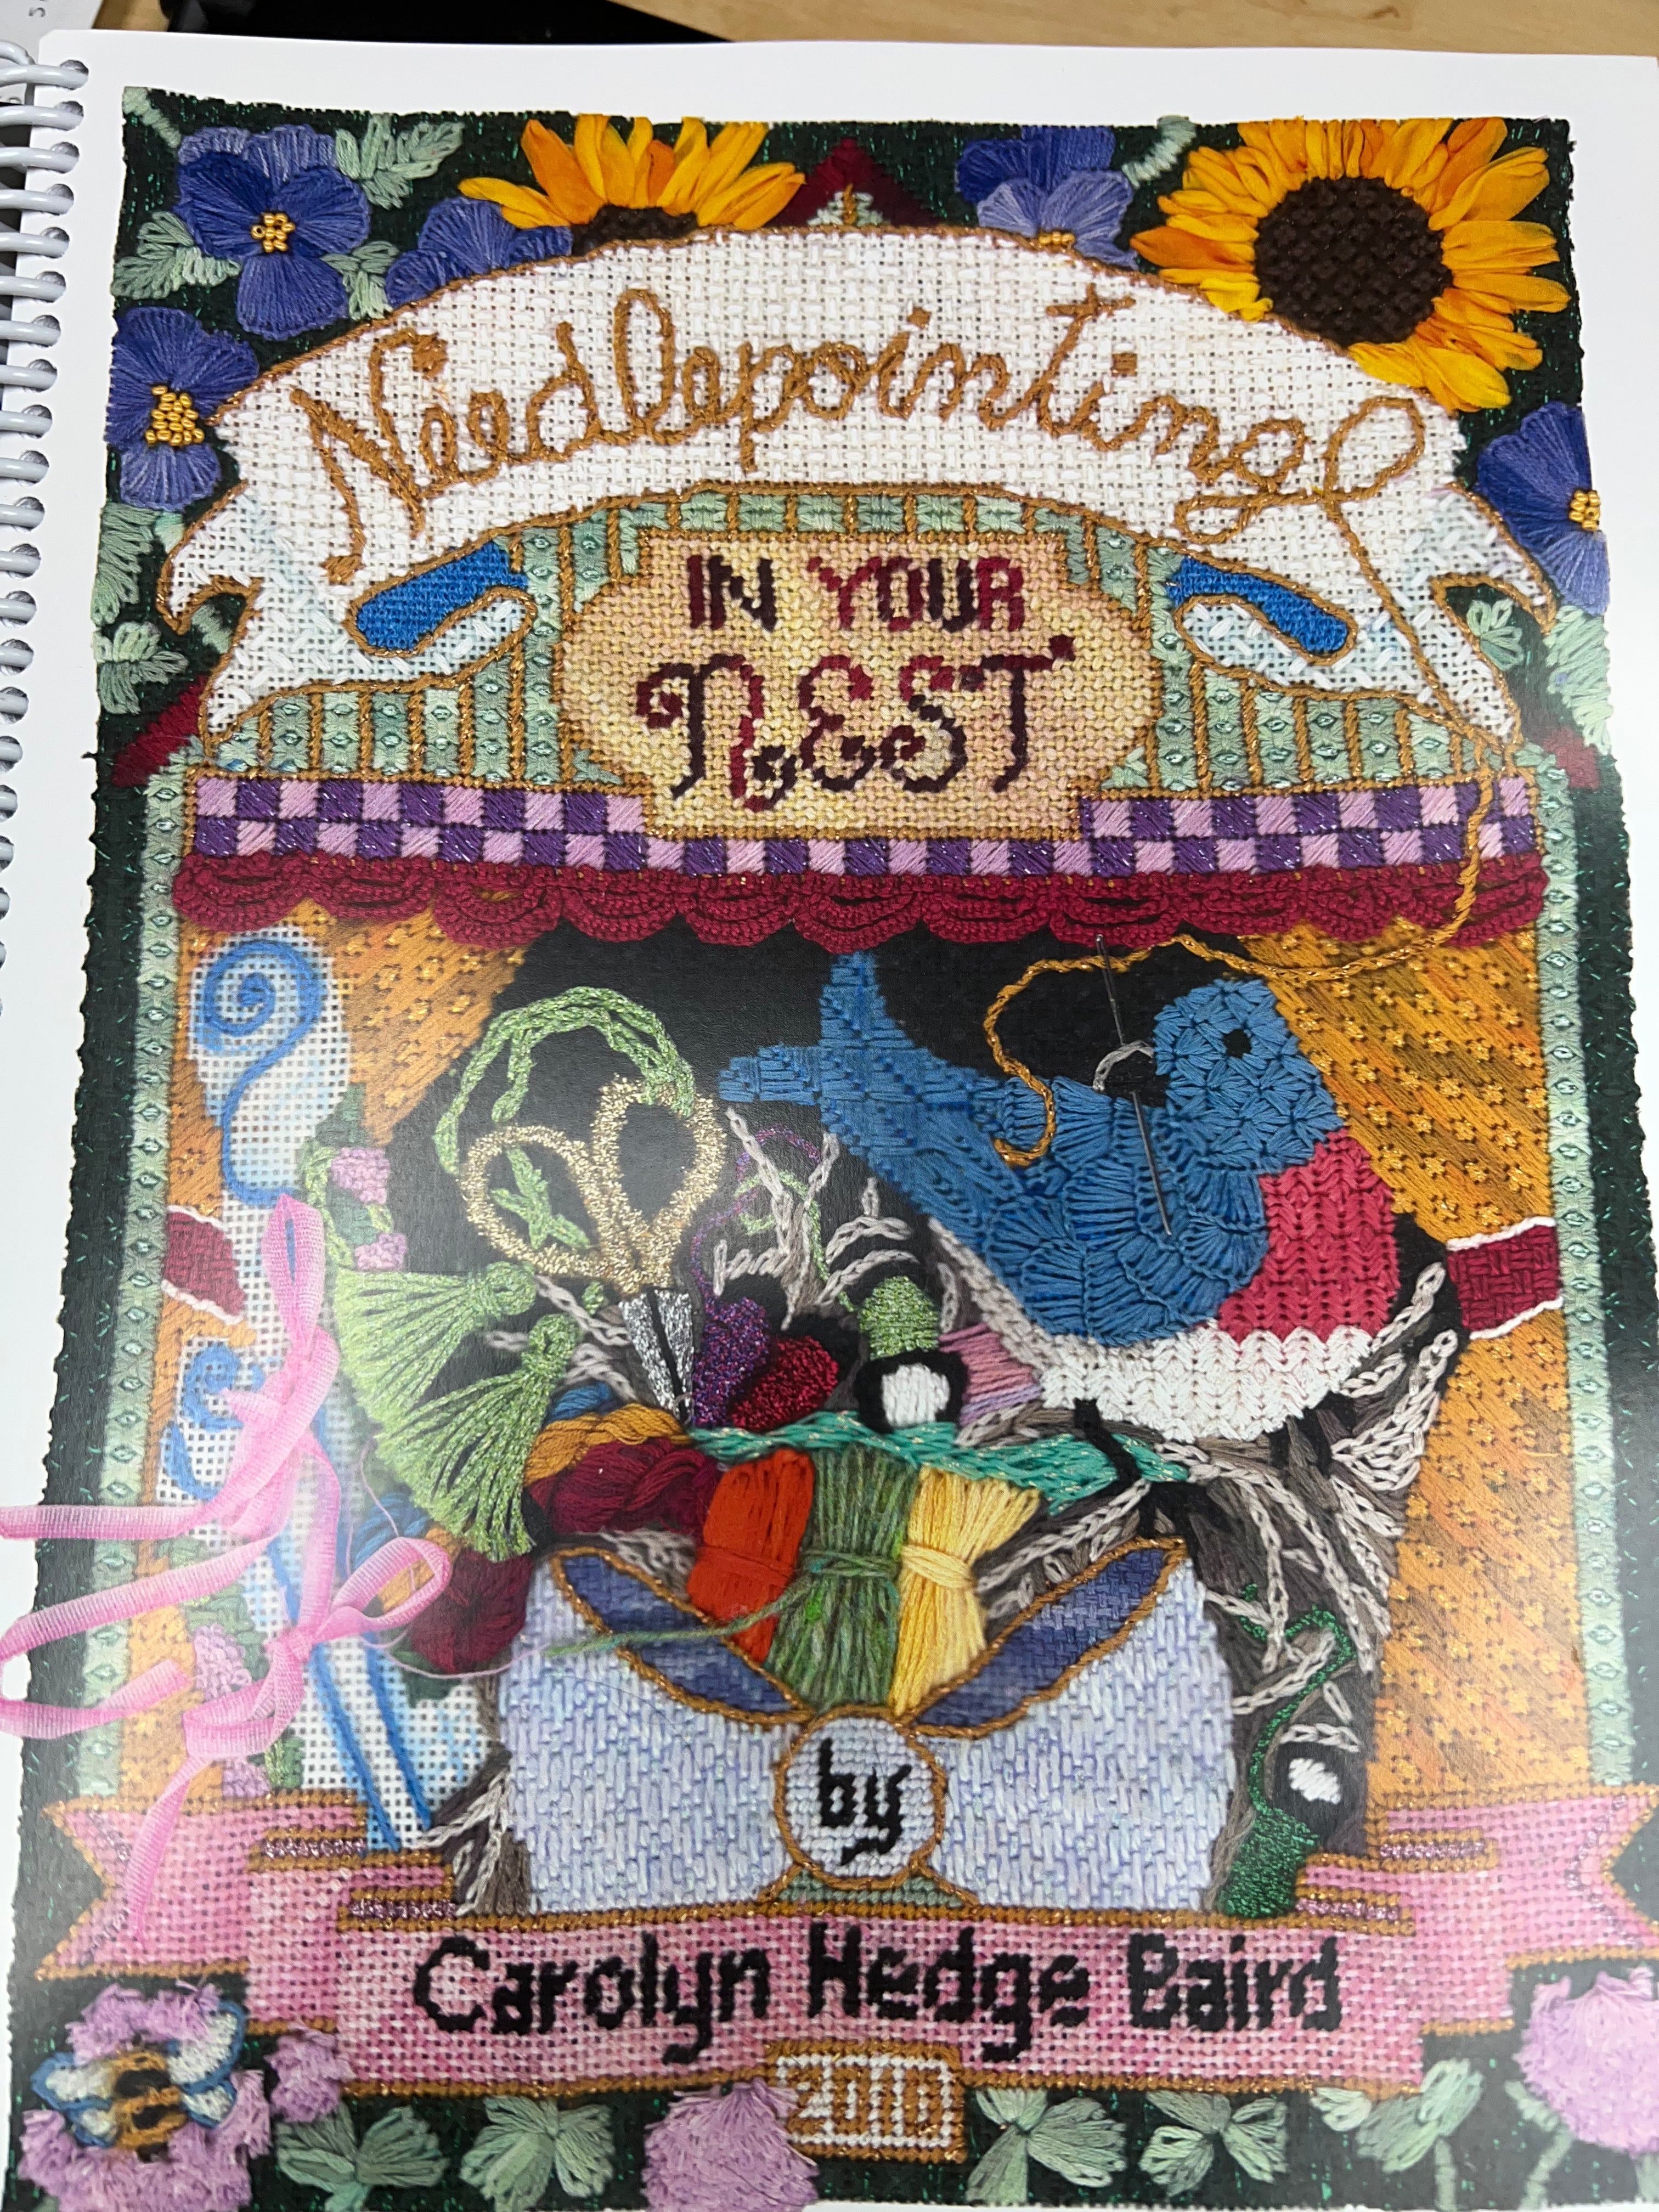 Needlepointing in Your Nest by Carolyn Hedge Baird